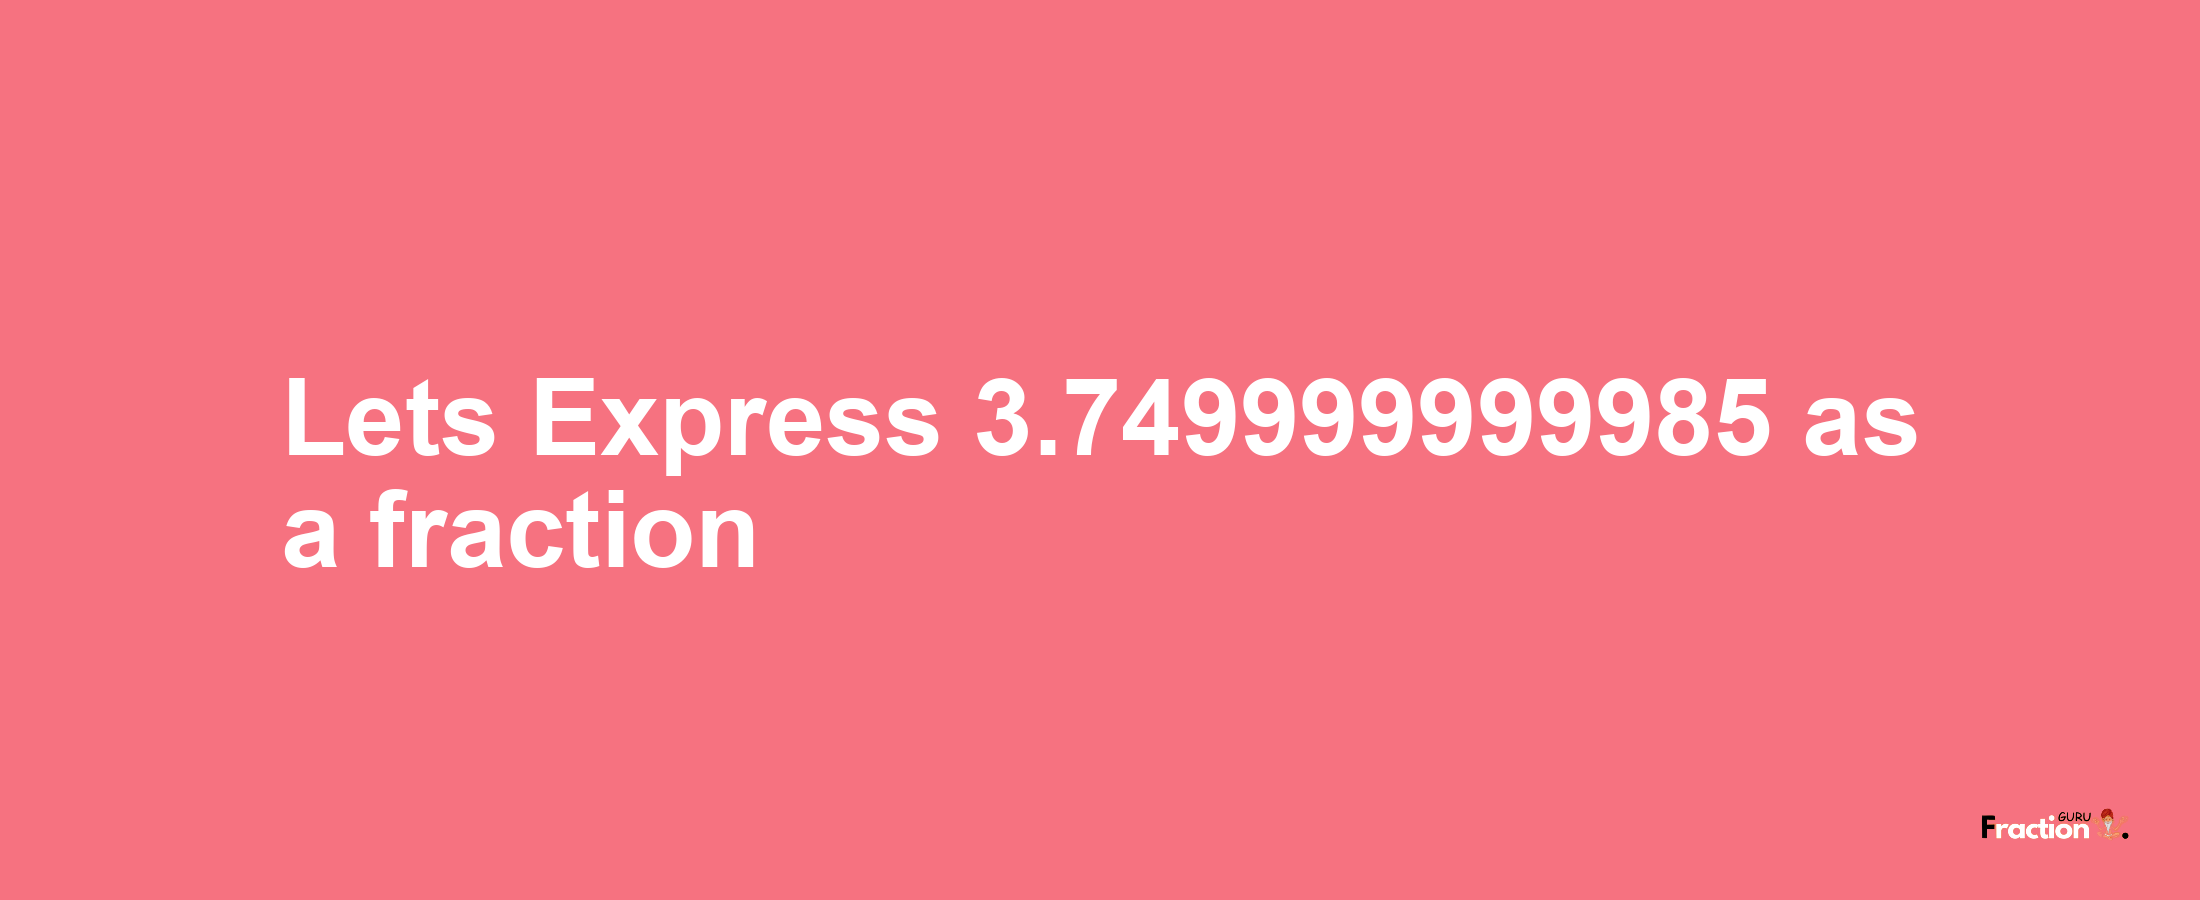 Lets Express 3.749999999985 as afraction